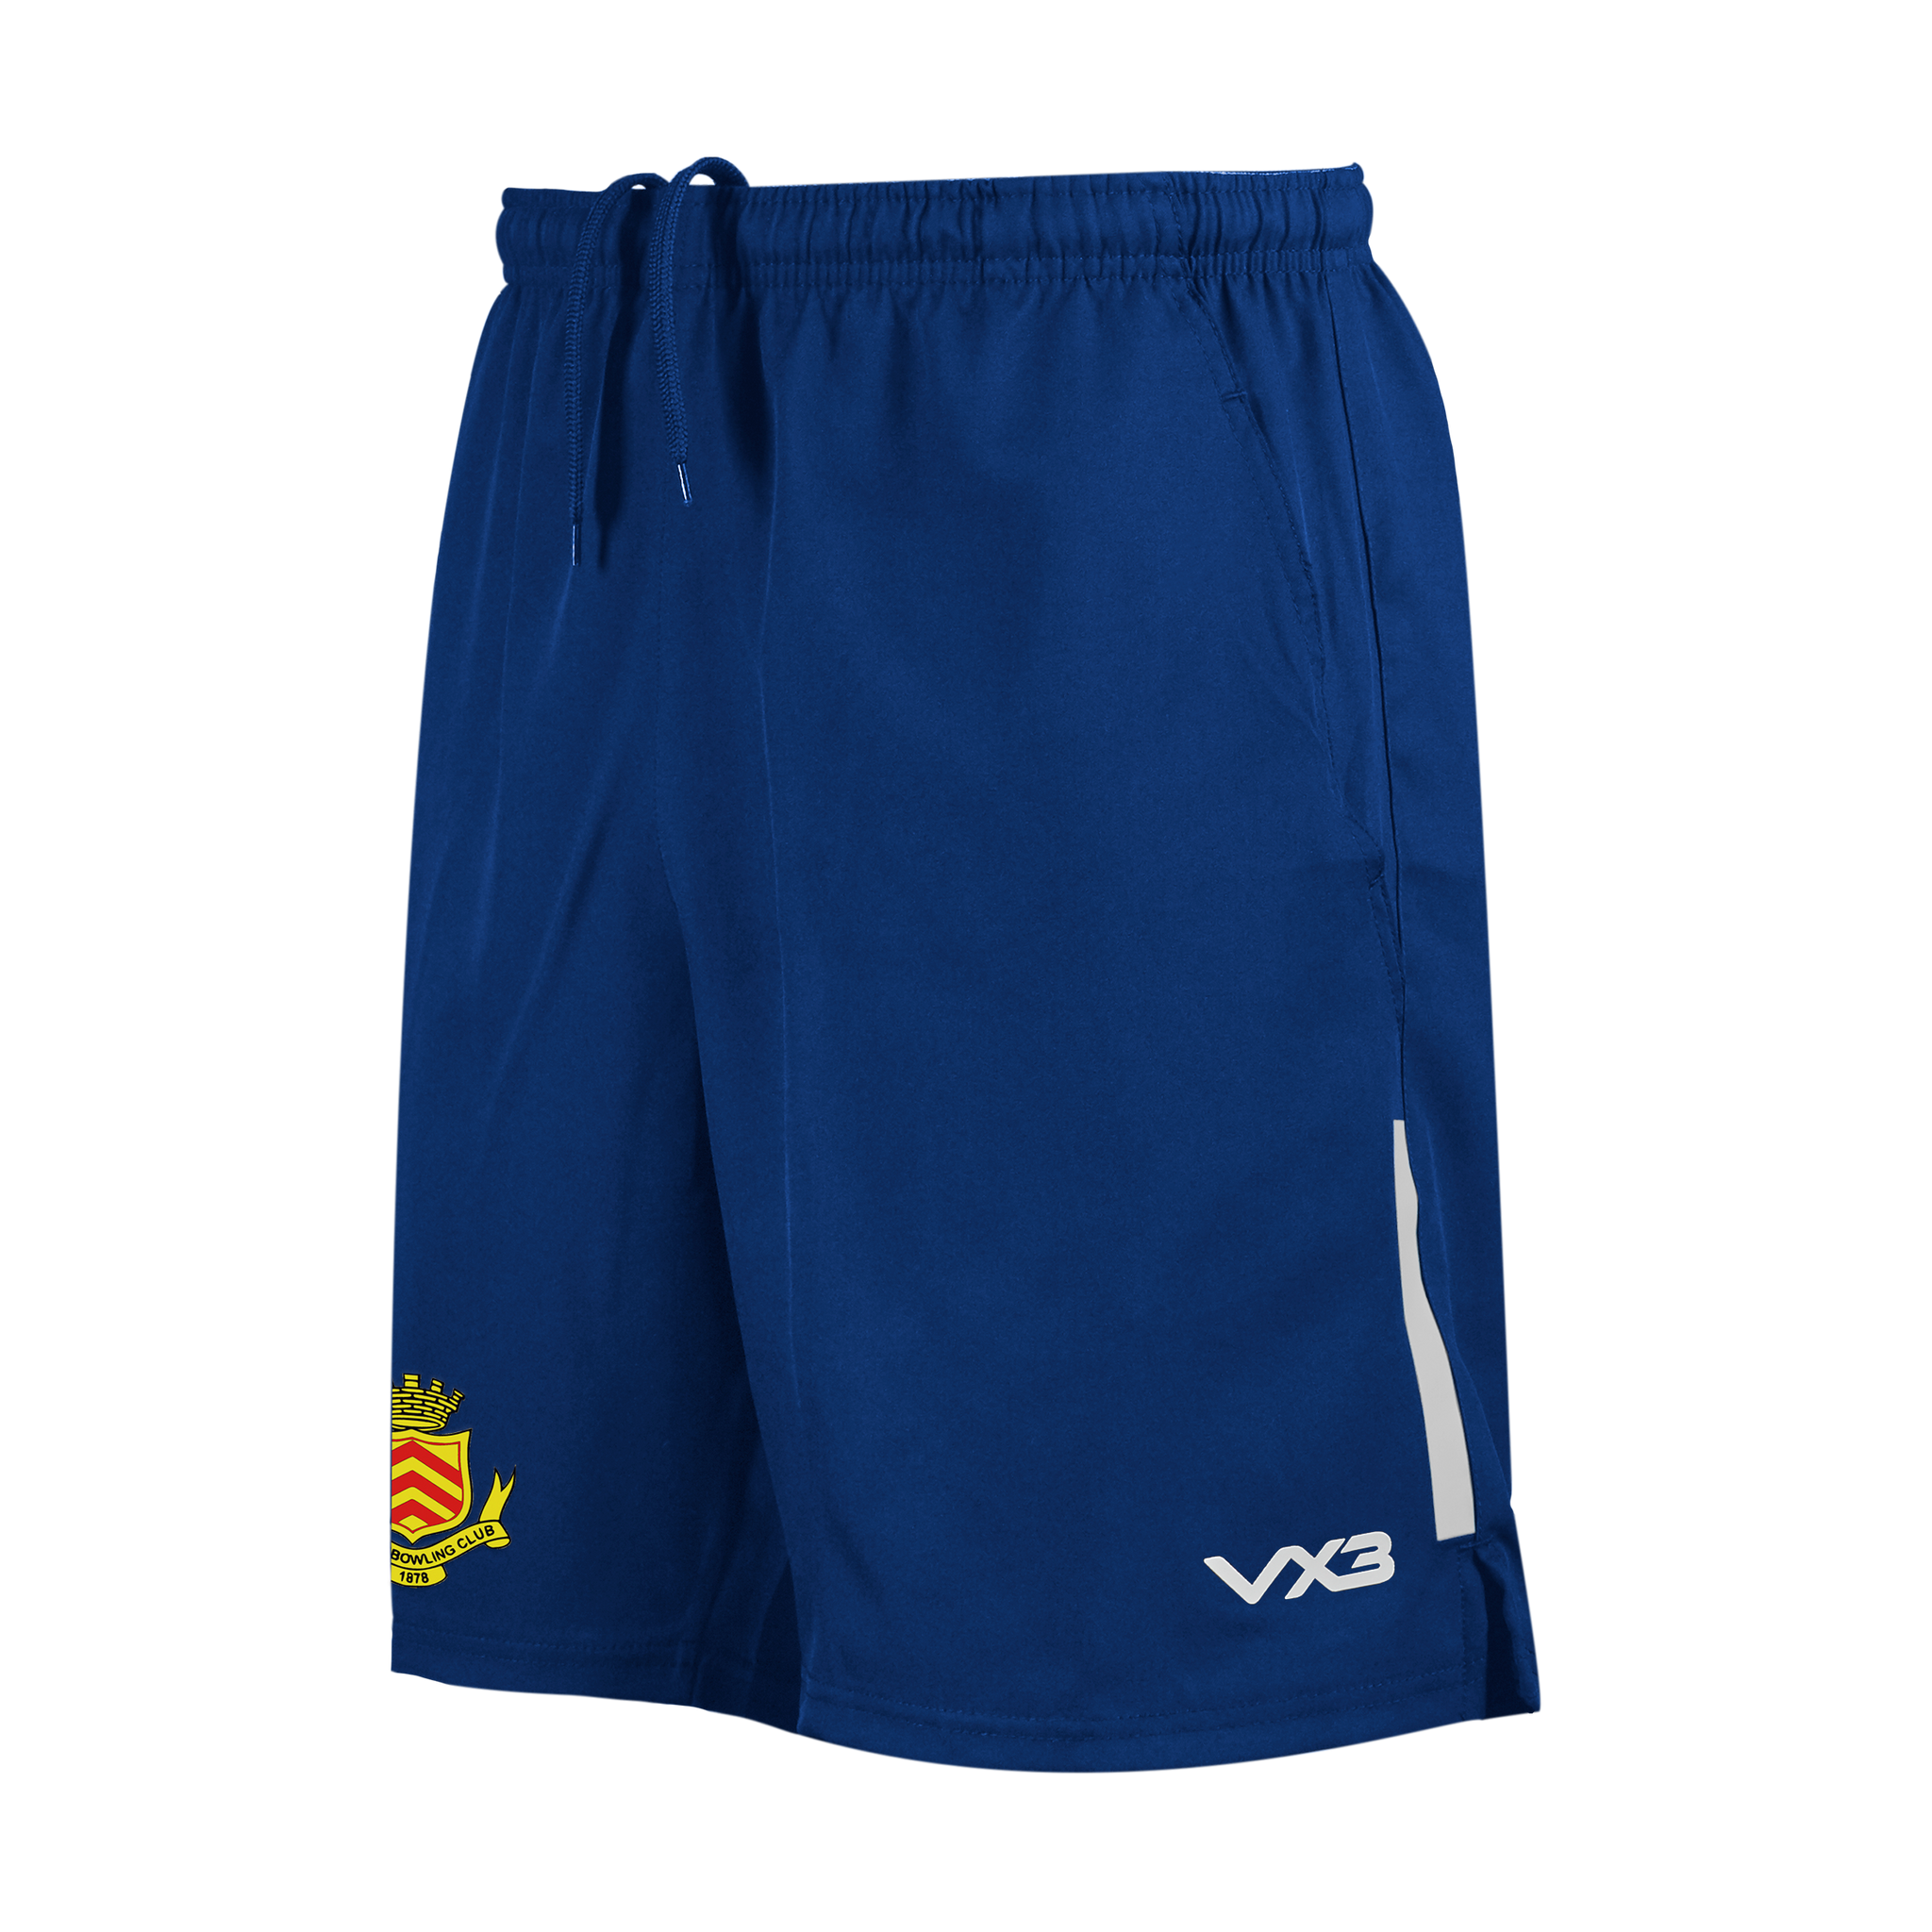 Cardiff Bowls Fortis Travel Shorts